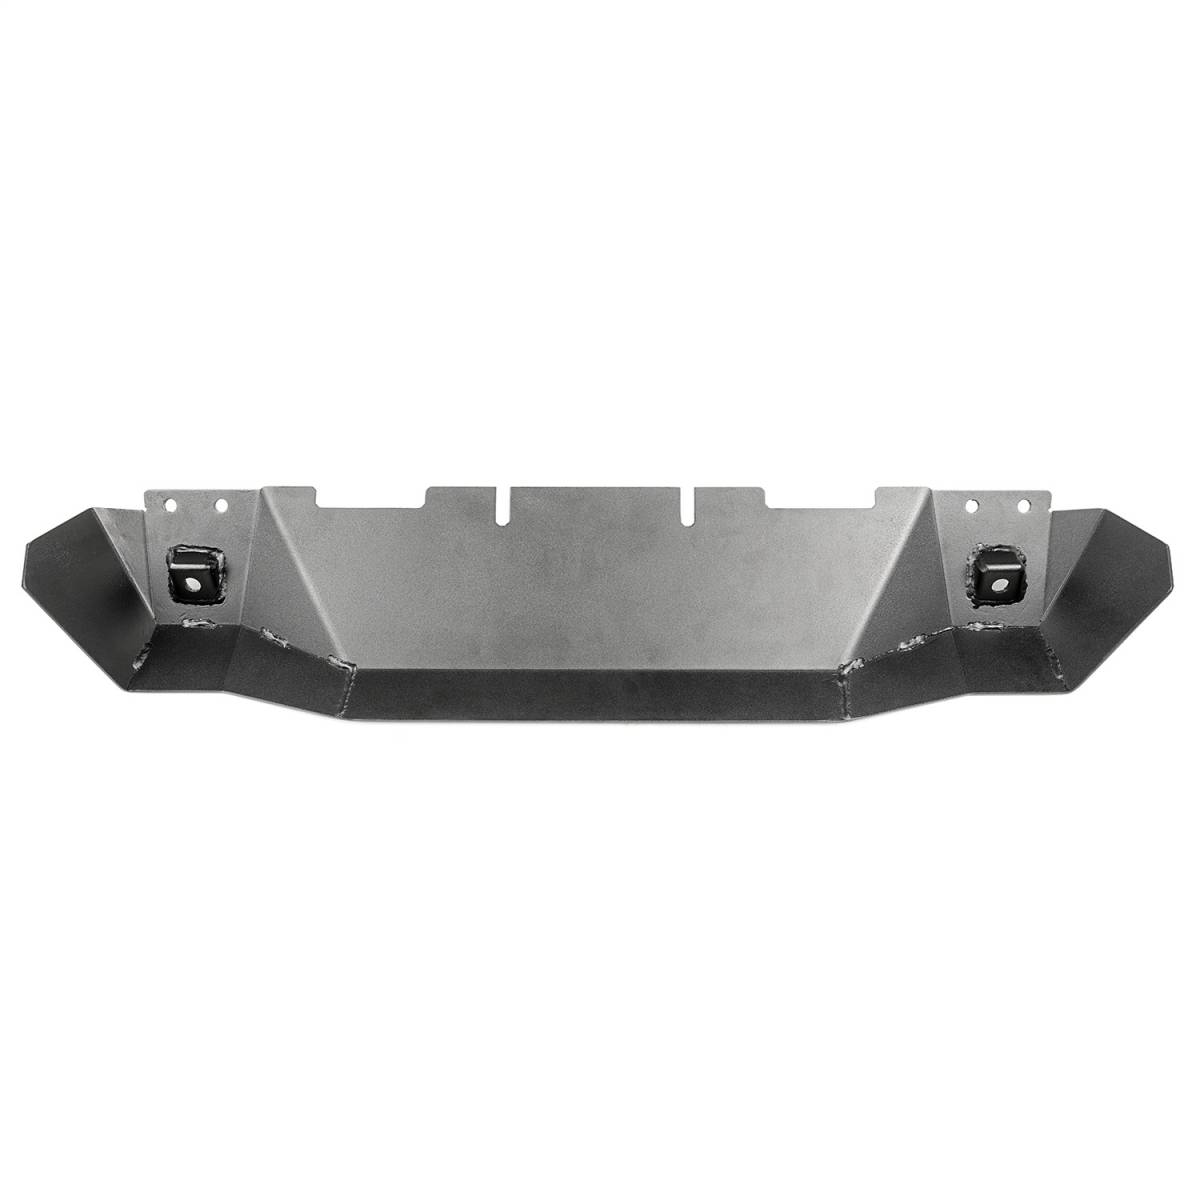 Rugged Ridge Skid Plate, Front #18003.61 Skid Plate, Front Nelson Truck